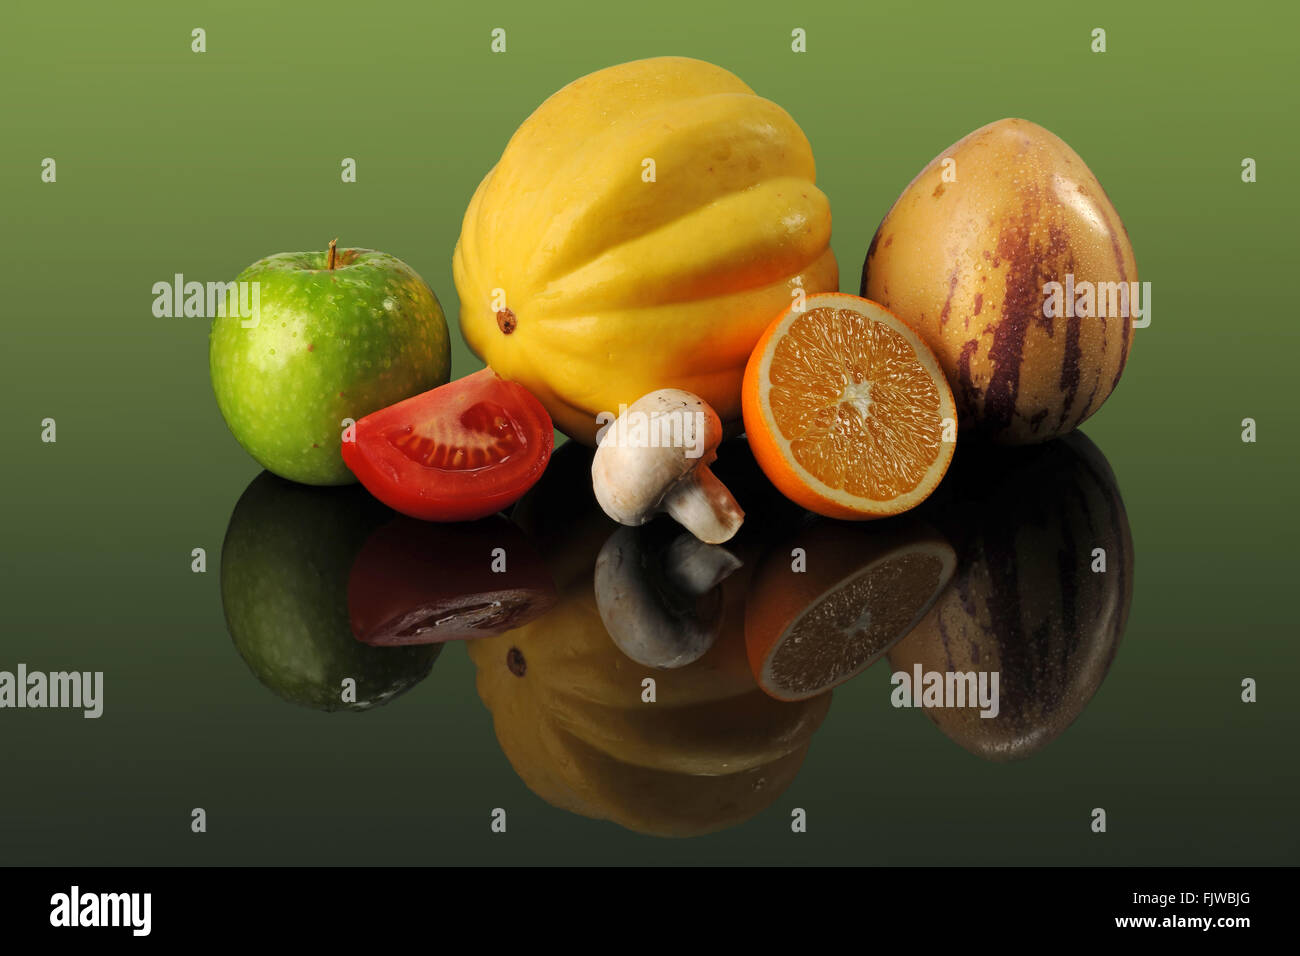 Fresh fruits and vegetables on reflective table over green background Stock Photo